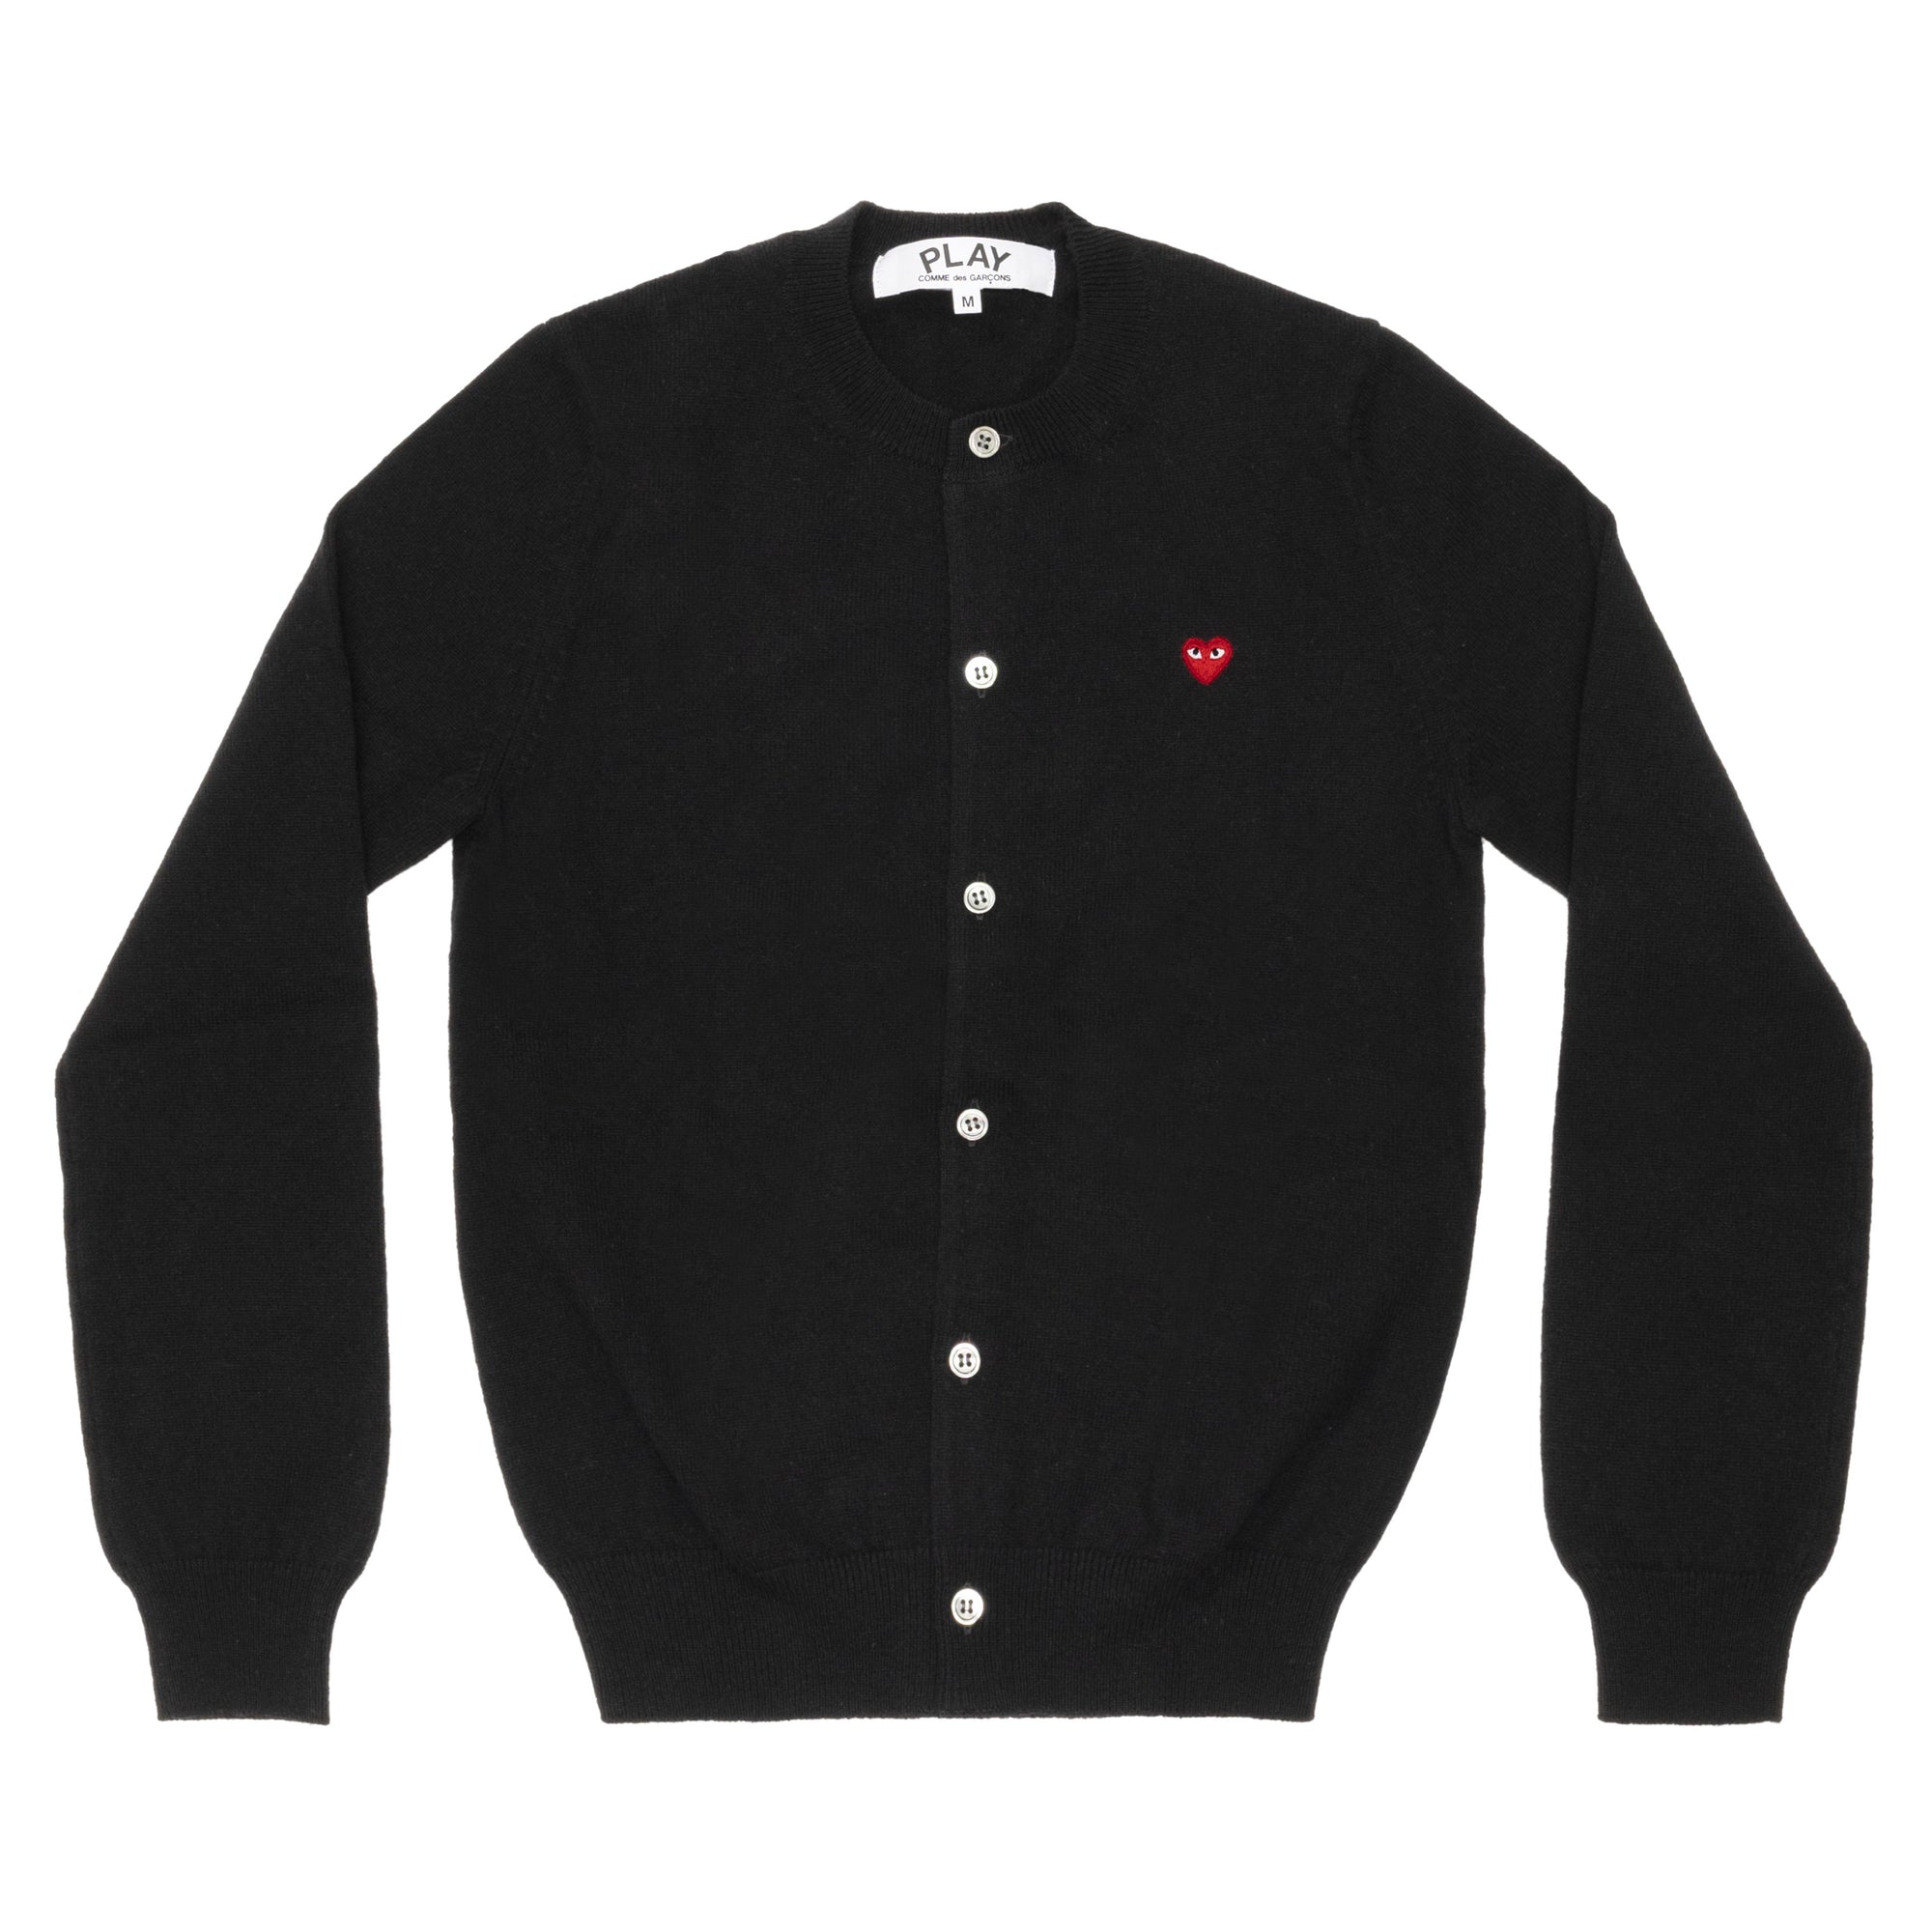 PLAY CDG - LADIES' CARDIGAN WITH SMALL RED HEART - (BLACK) view 1